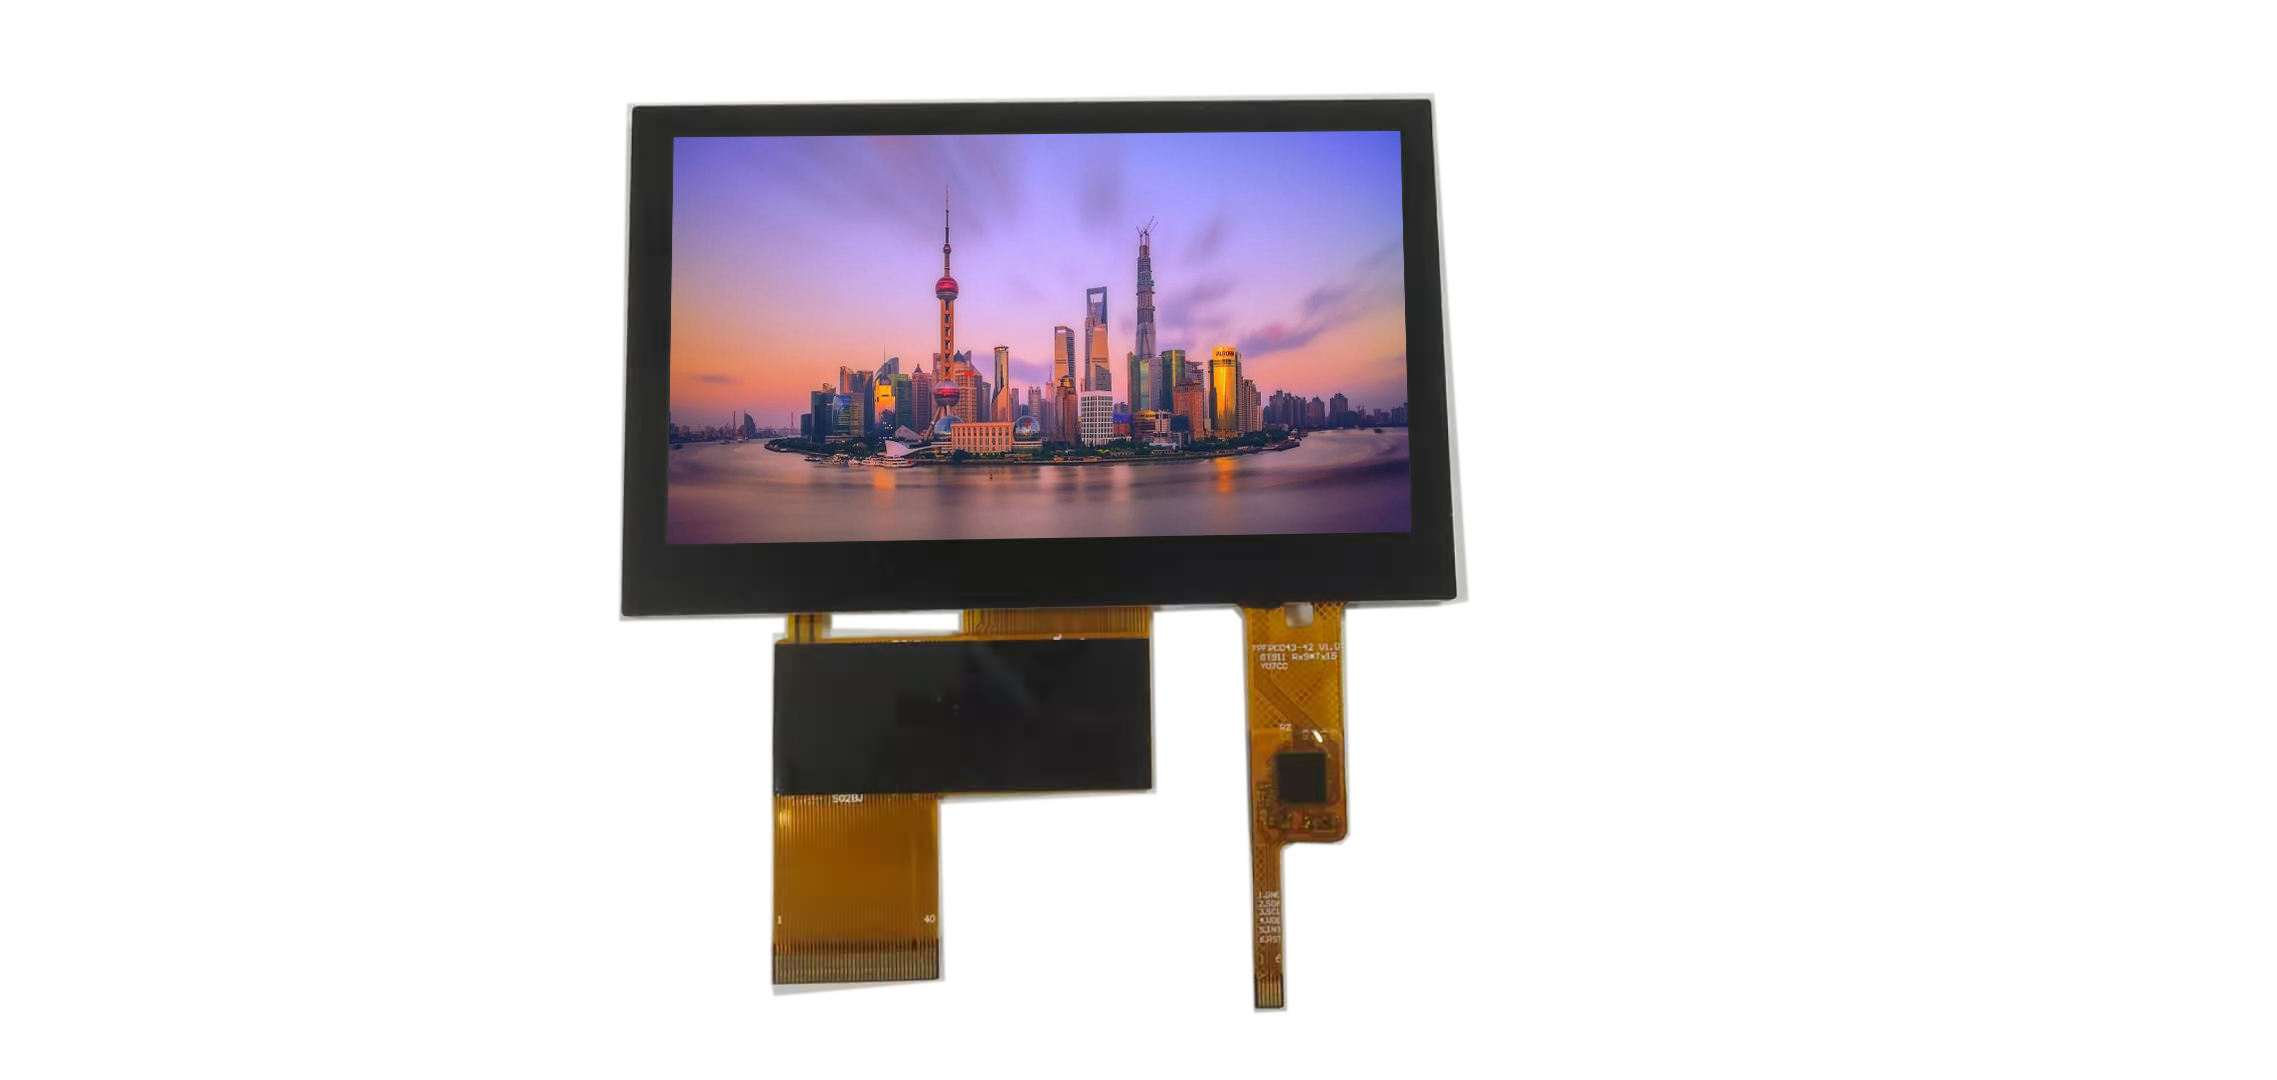 4.3 inch 480*272 IPS TFT LCD display with P-Cap/CTP